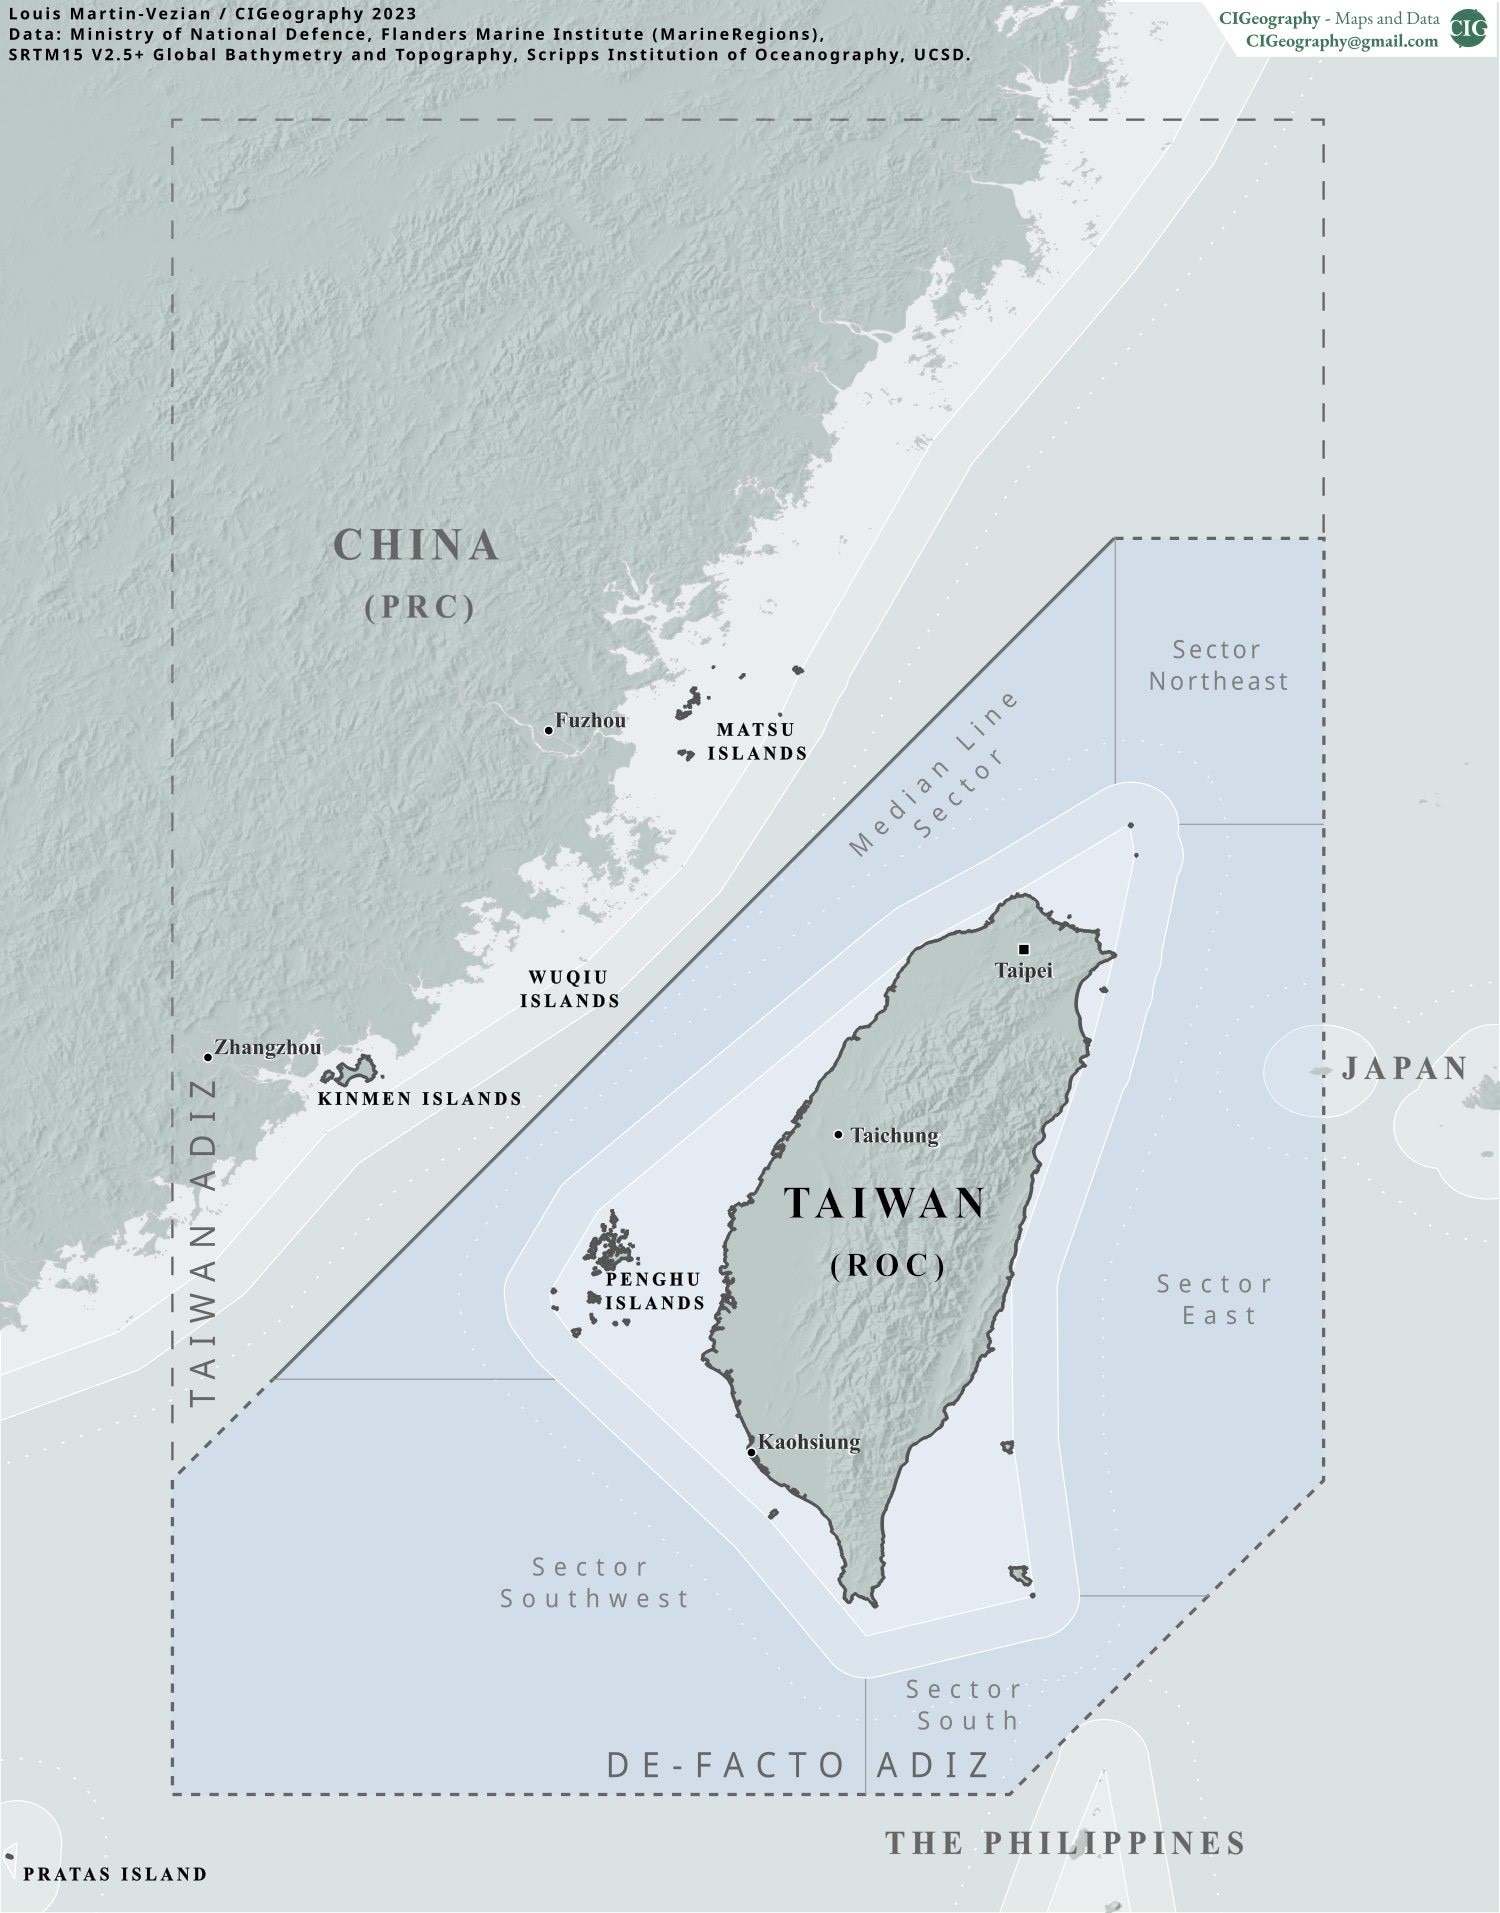 A map of Taiwan shows a dotted line extending around the island and over parts of south-eastern China, with shaded sections